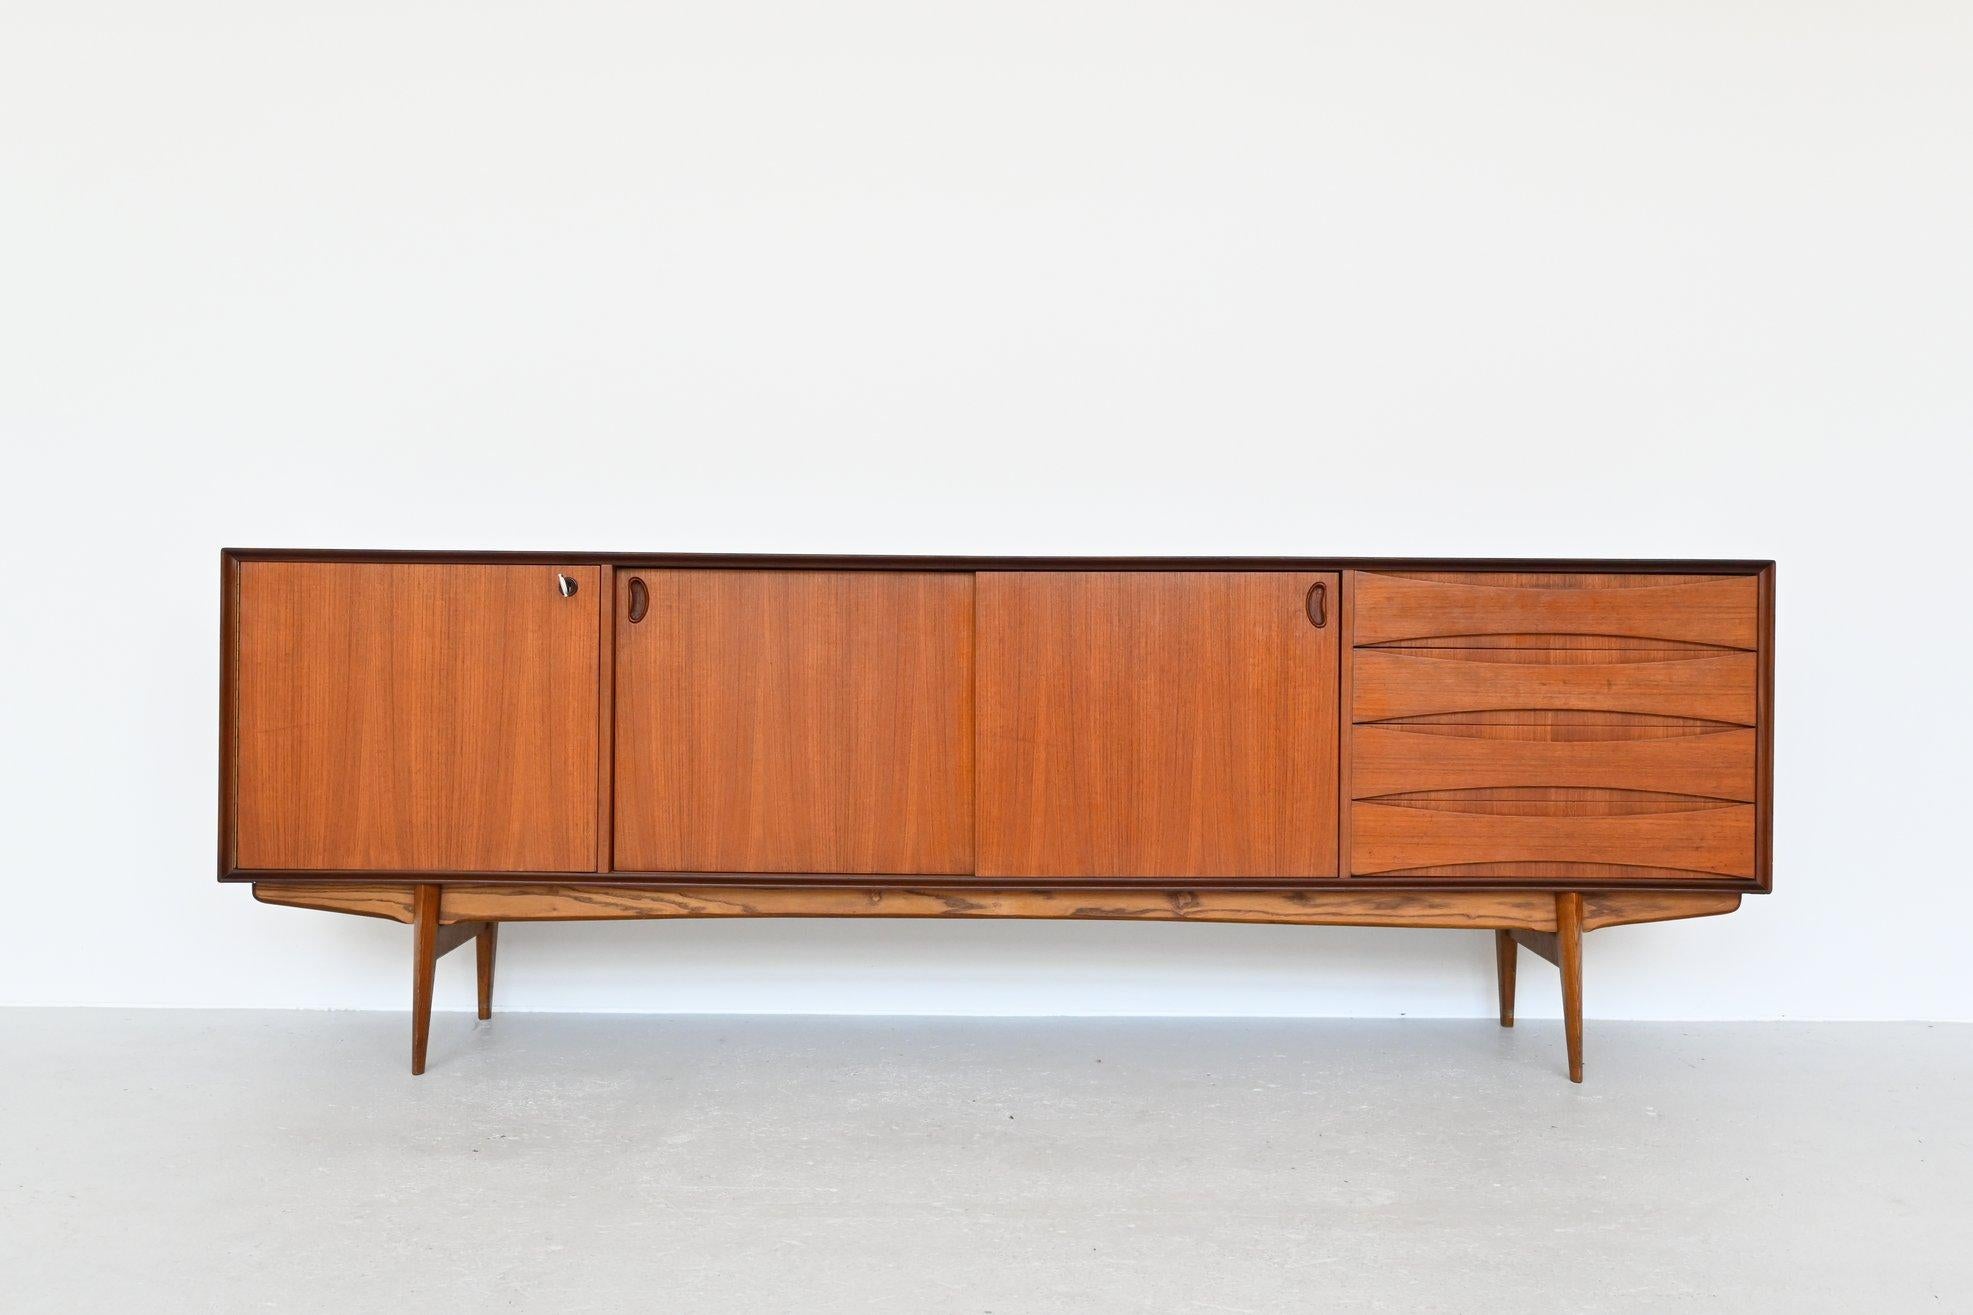 Stunning high quality sideboard designed by Oswald Vermaercke and manufactured by V-Form, Belgium, 1959. This amazing credenza has a very nice teak grain and is in fully original condition. It’s a very nicely crafted piece of Belgium midcentury